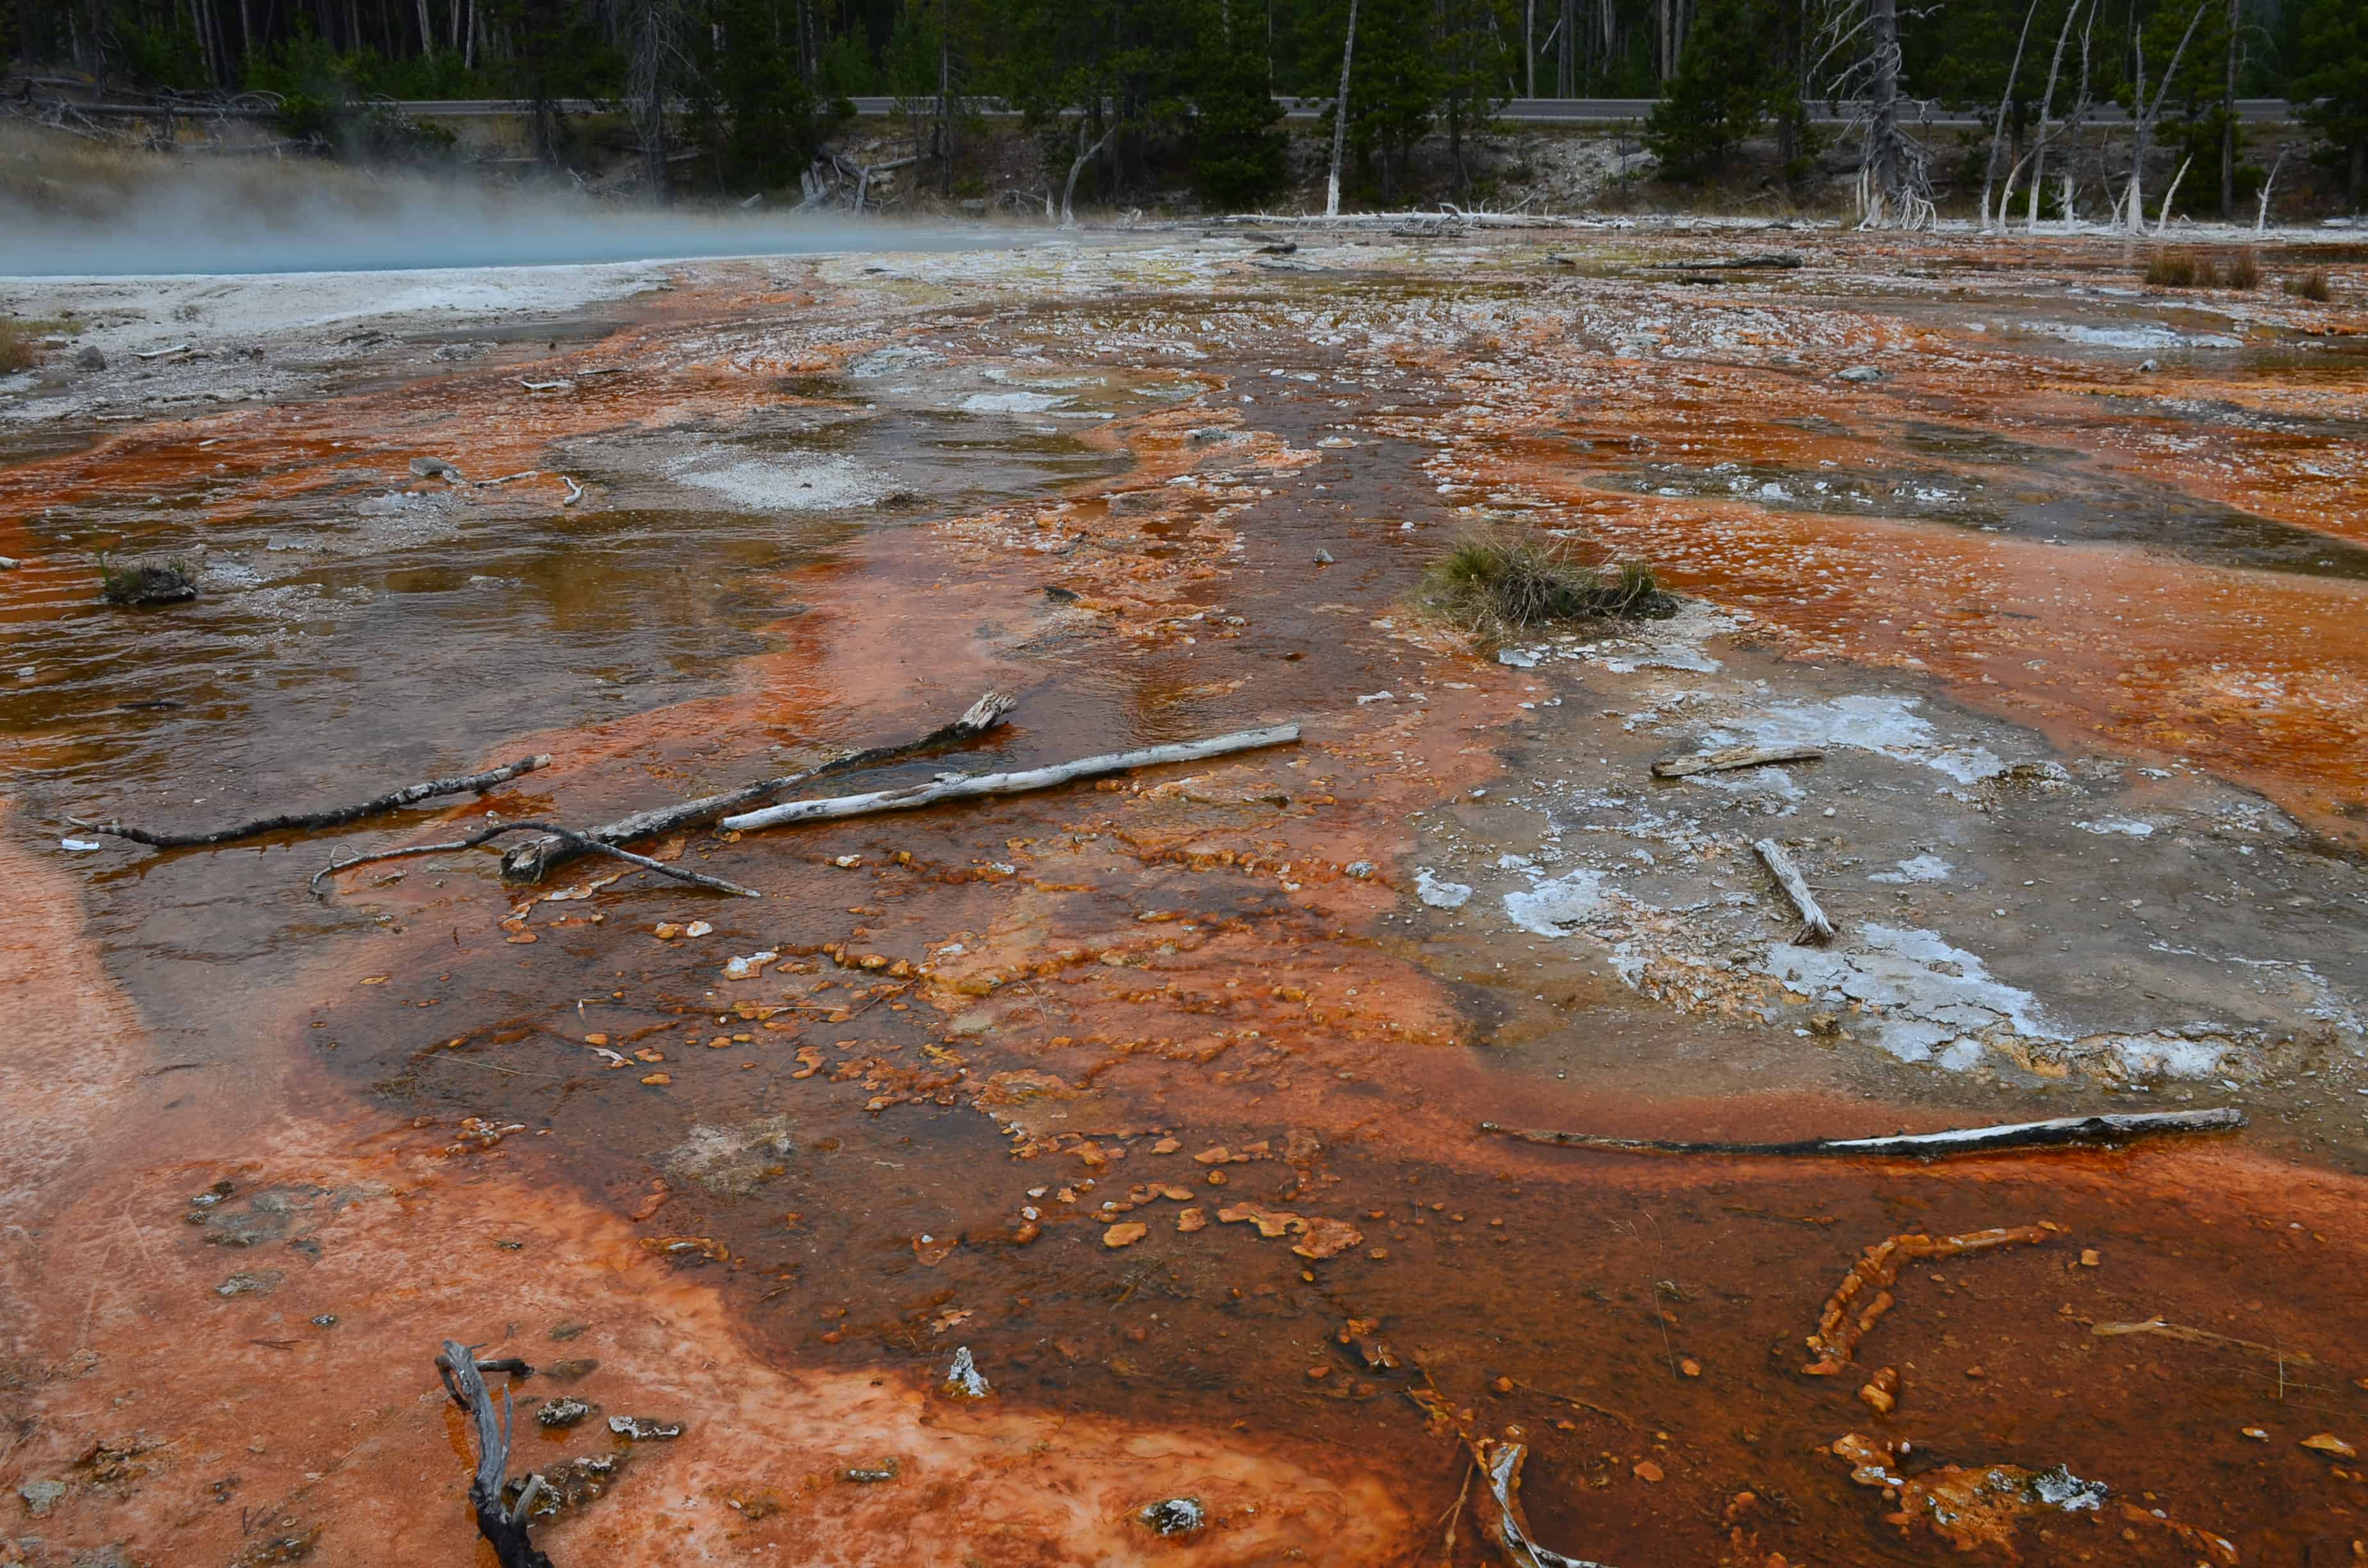 Fountain Paint Pots area at the Lower Geyser Basin in Yellowstone National Park, Wyoming